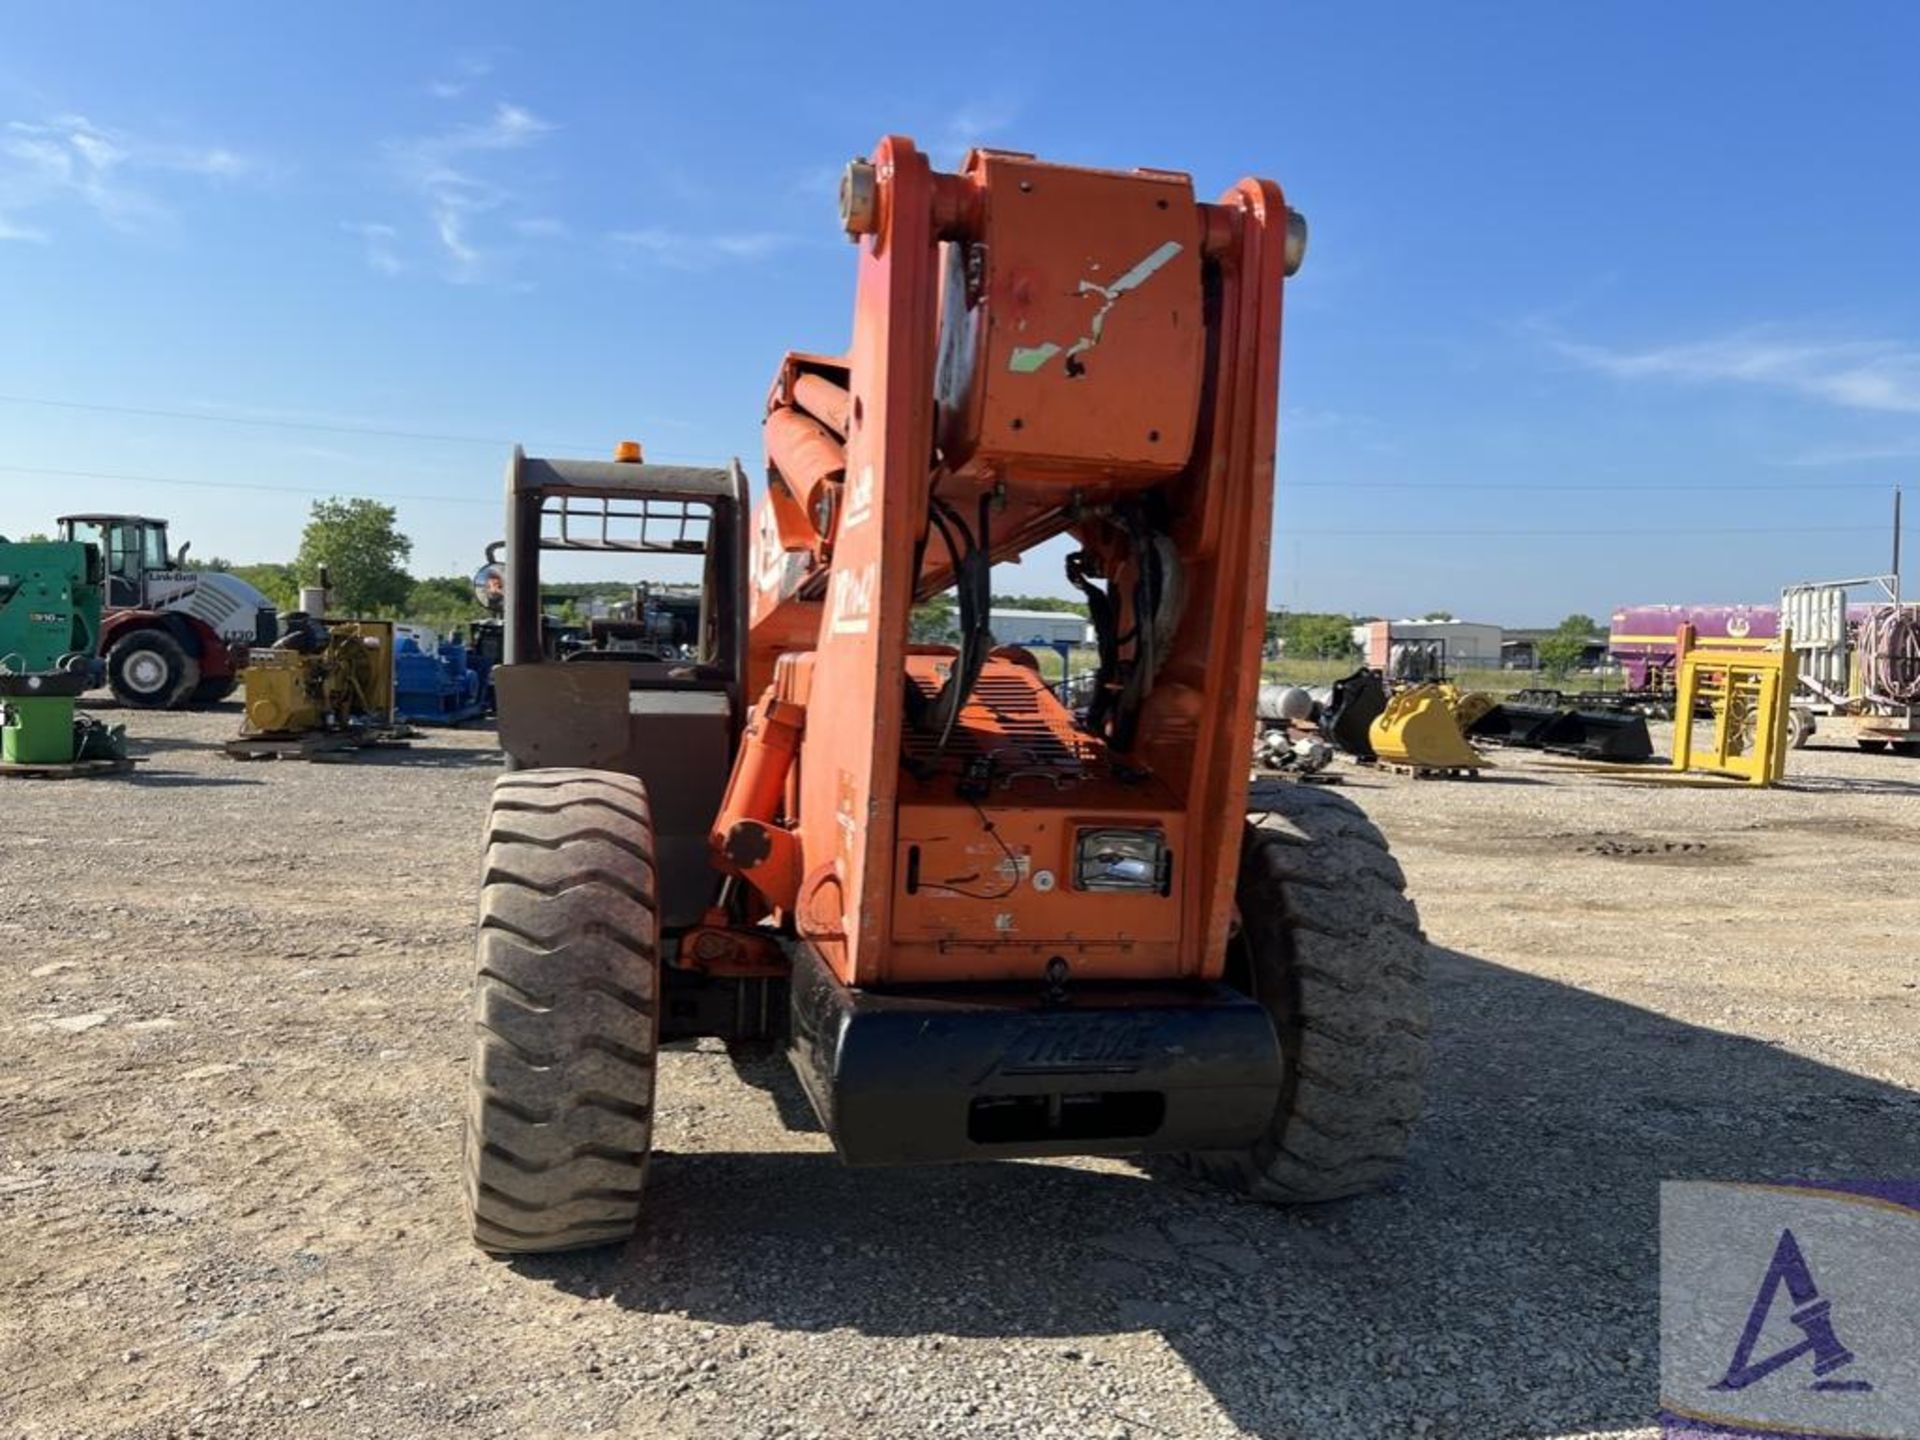 Extreme XR 1642 Telehandler, 16,000# Capacity, 42' Lift Height, OROPS - Image 20 of 50